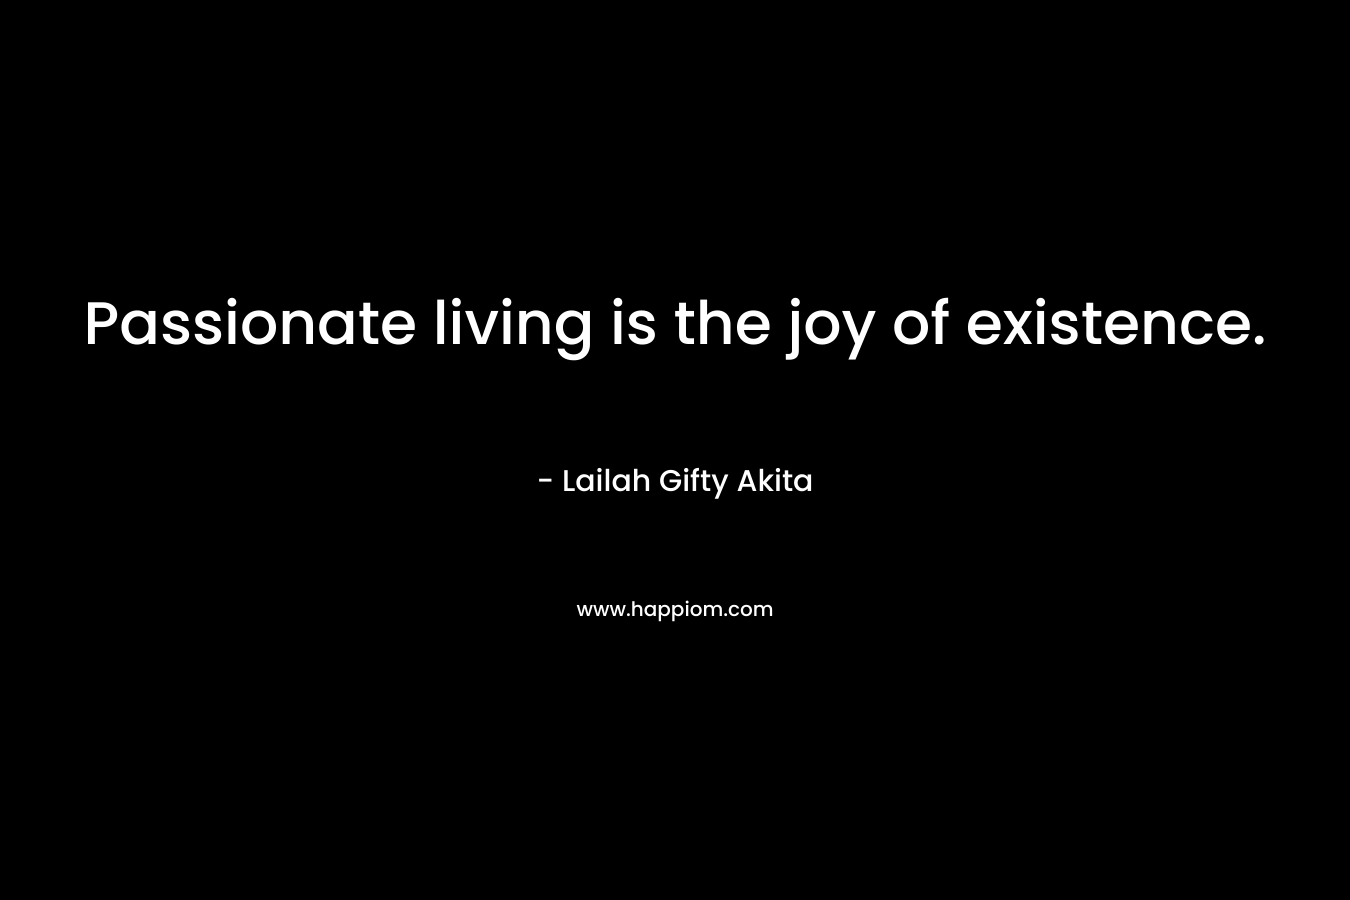 Passionate living is the joy of existence.